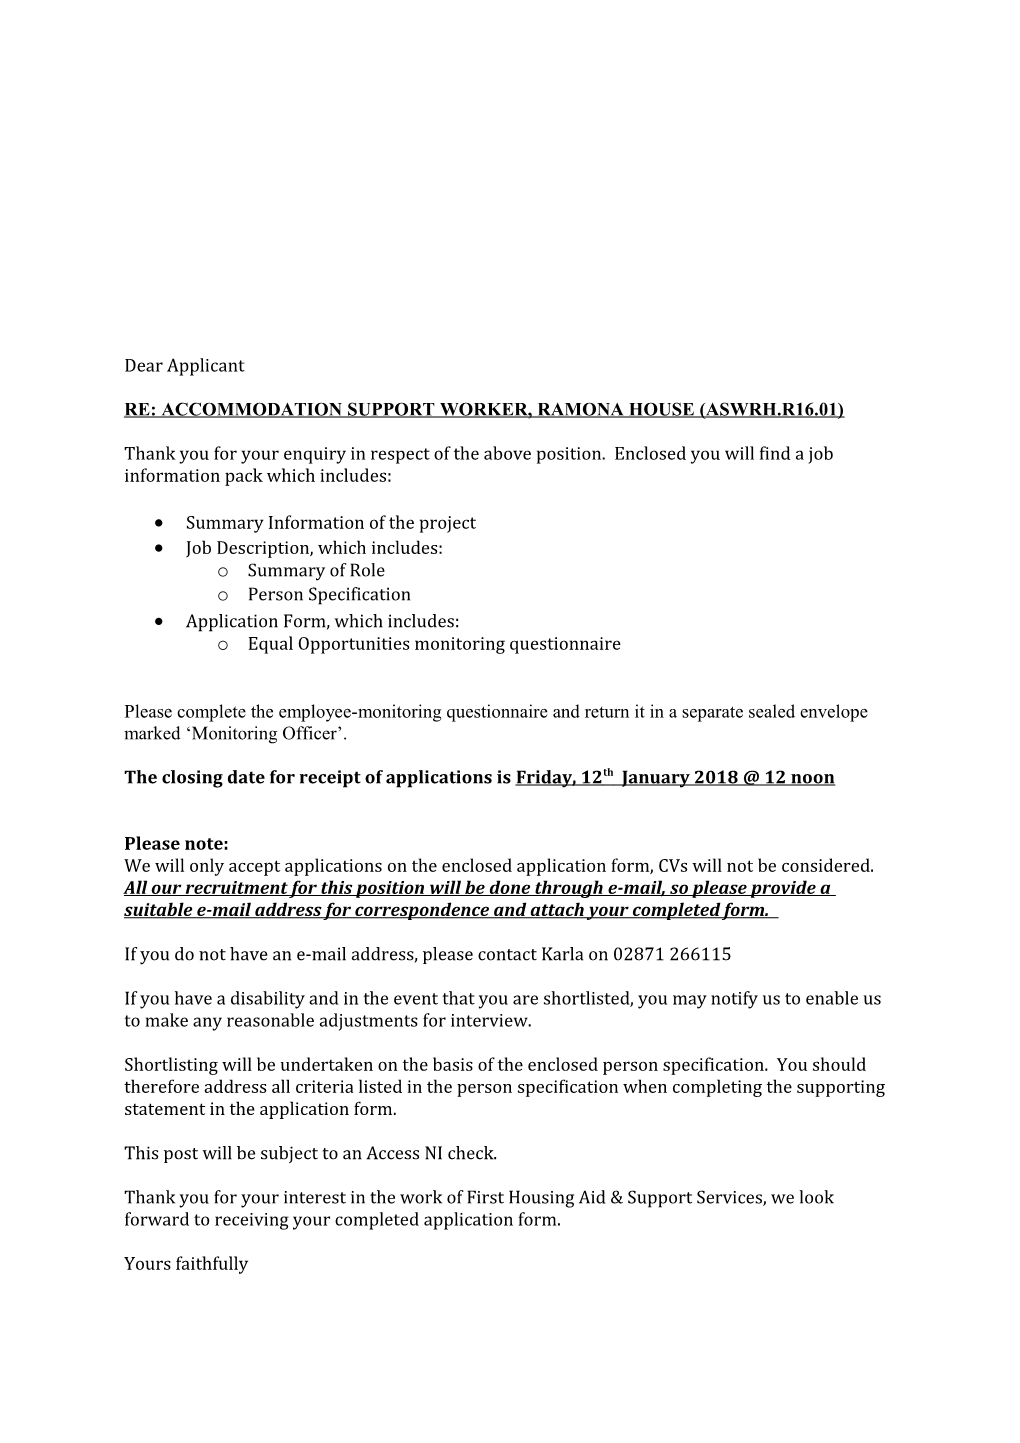 Re: Accommodation Support Worker, Ramona House (Aswrh.R16.01)